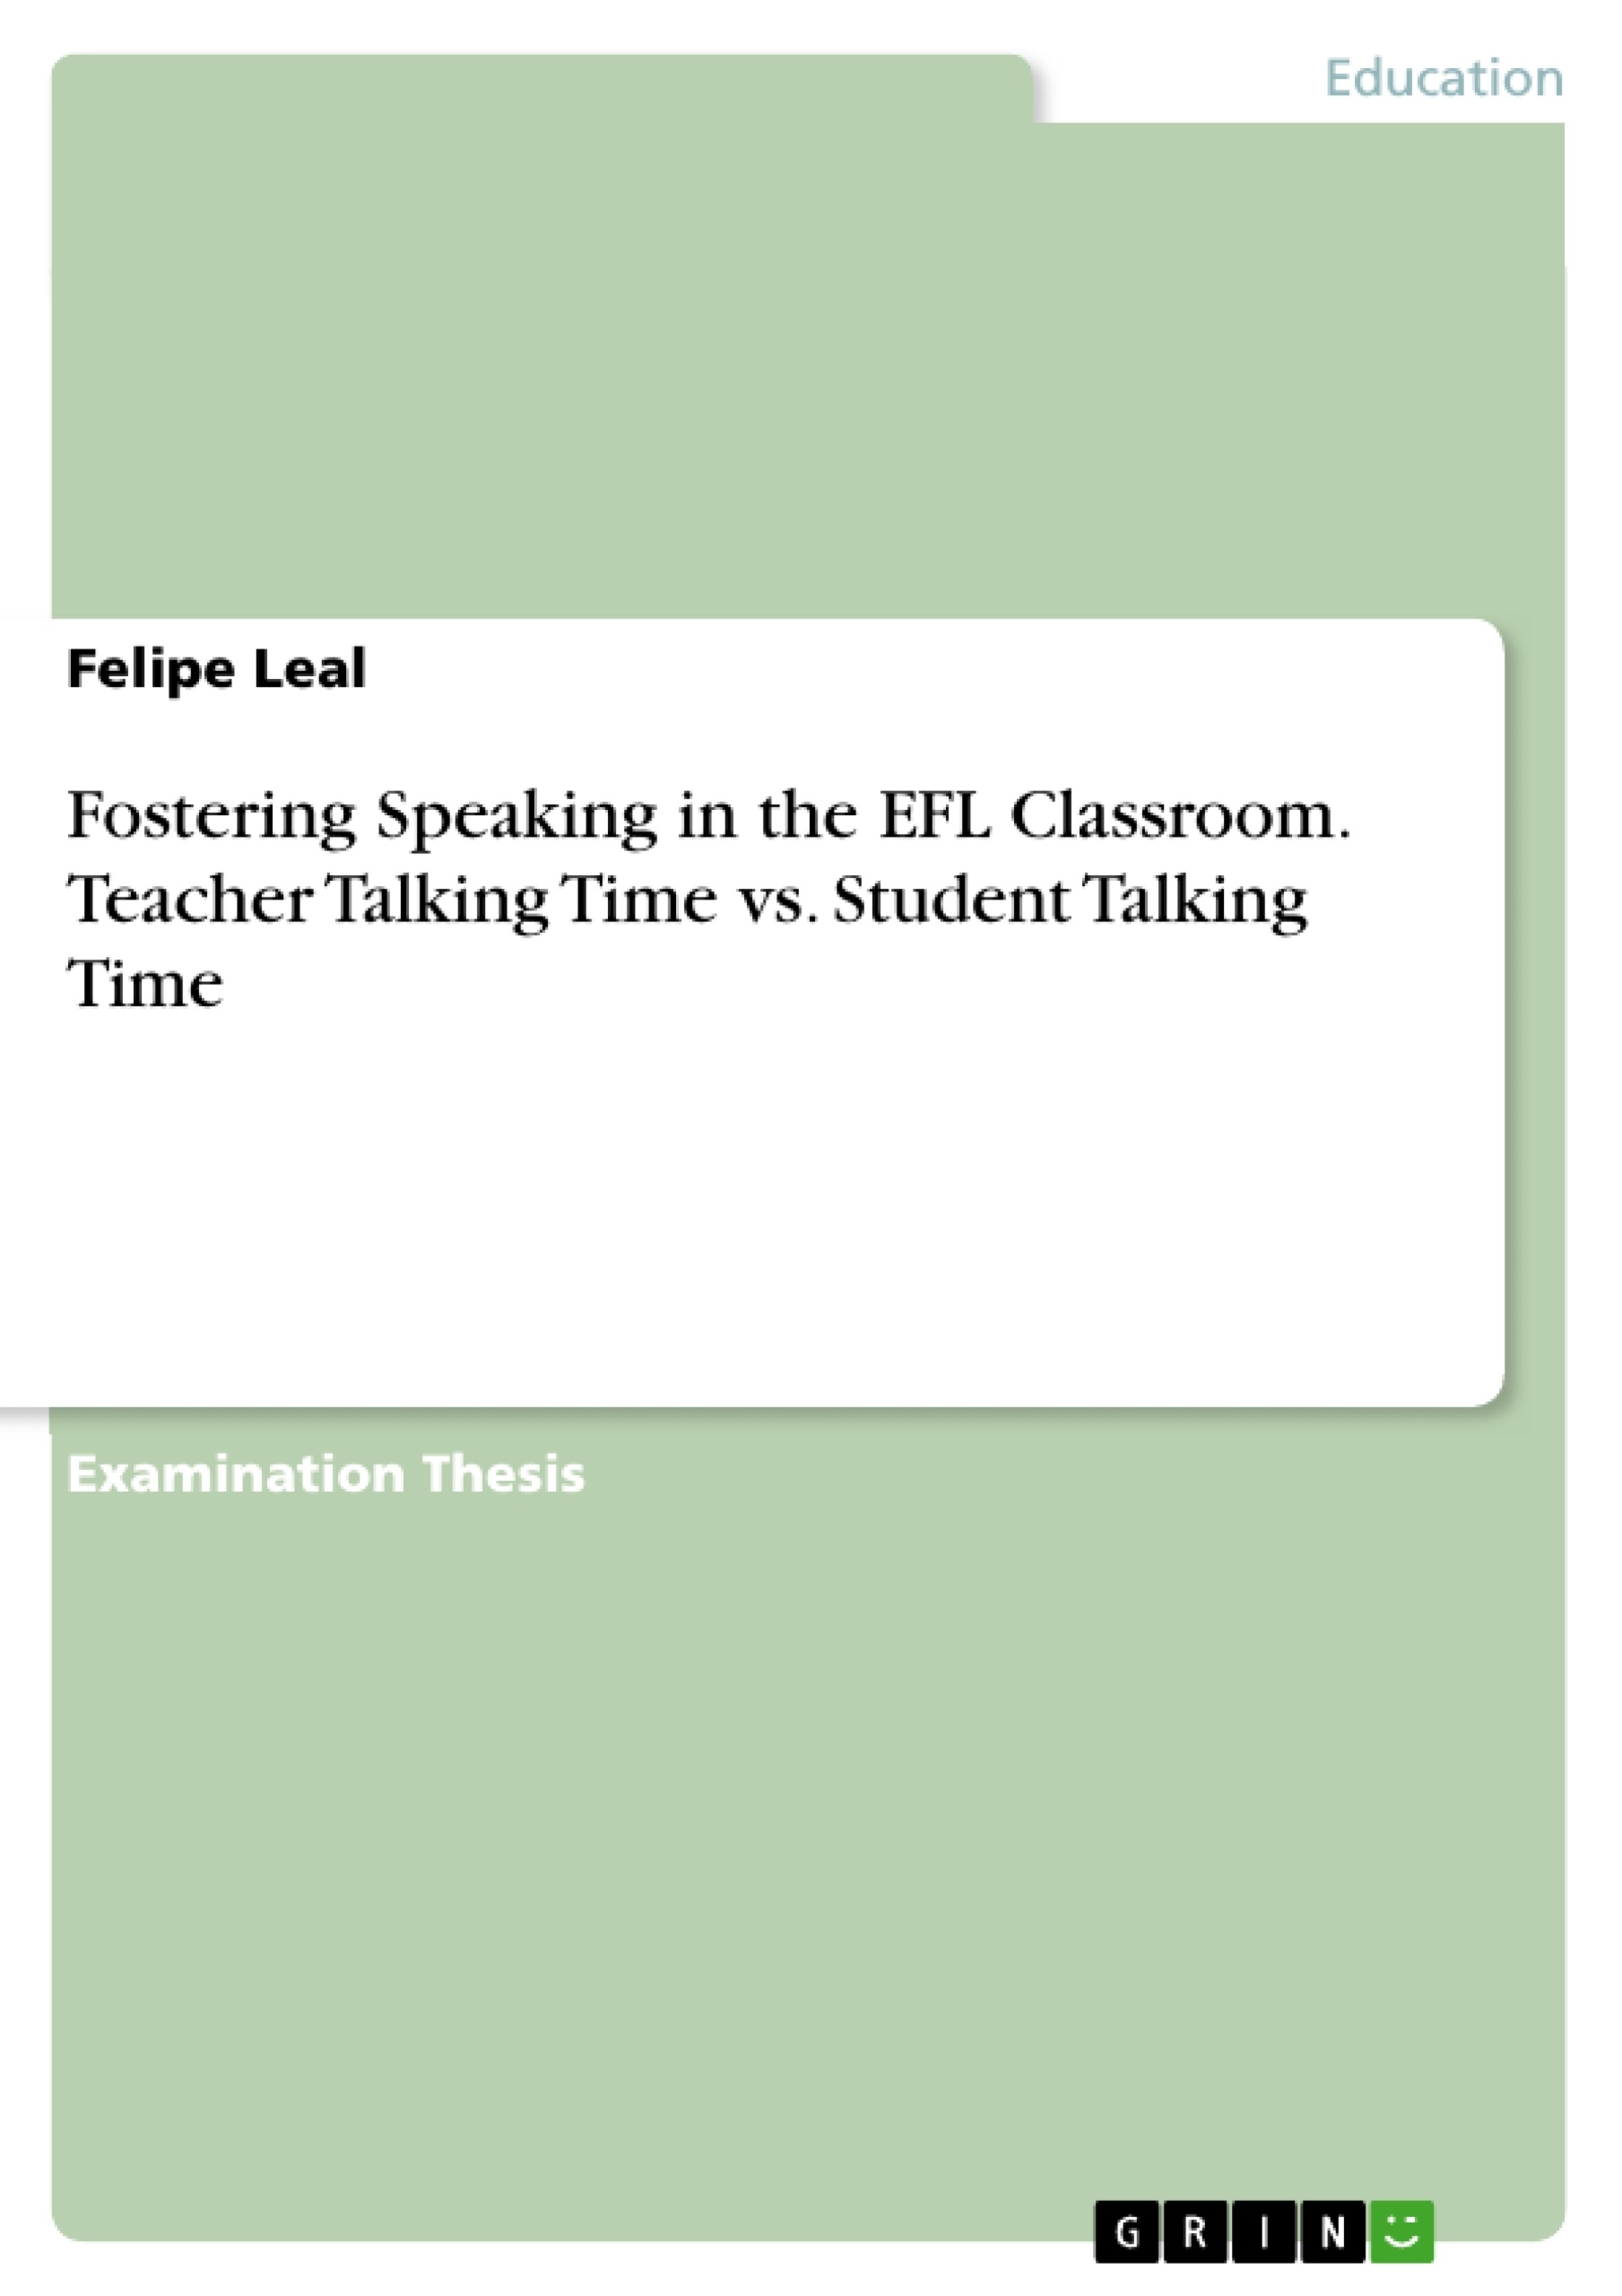 in　GRIN　Talking　Fostering　Teacher　the　Student　Classroom.　vs.　Time　Talking　EFL　Speaking　Time